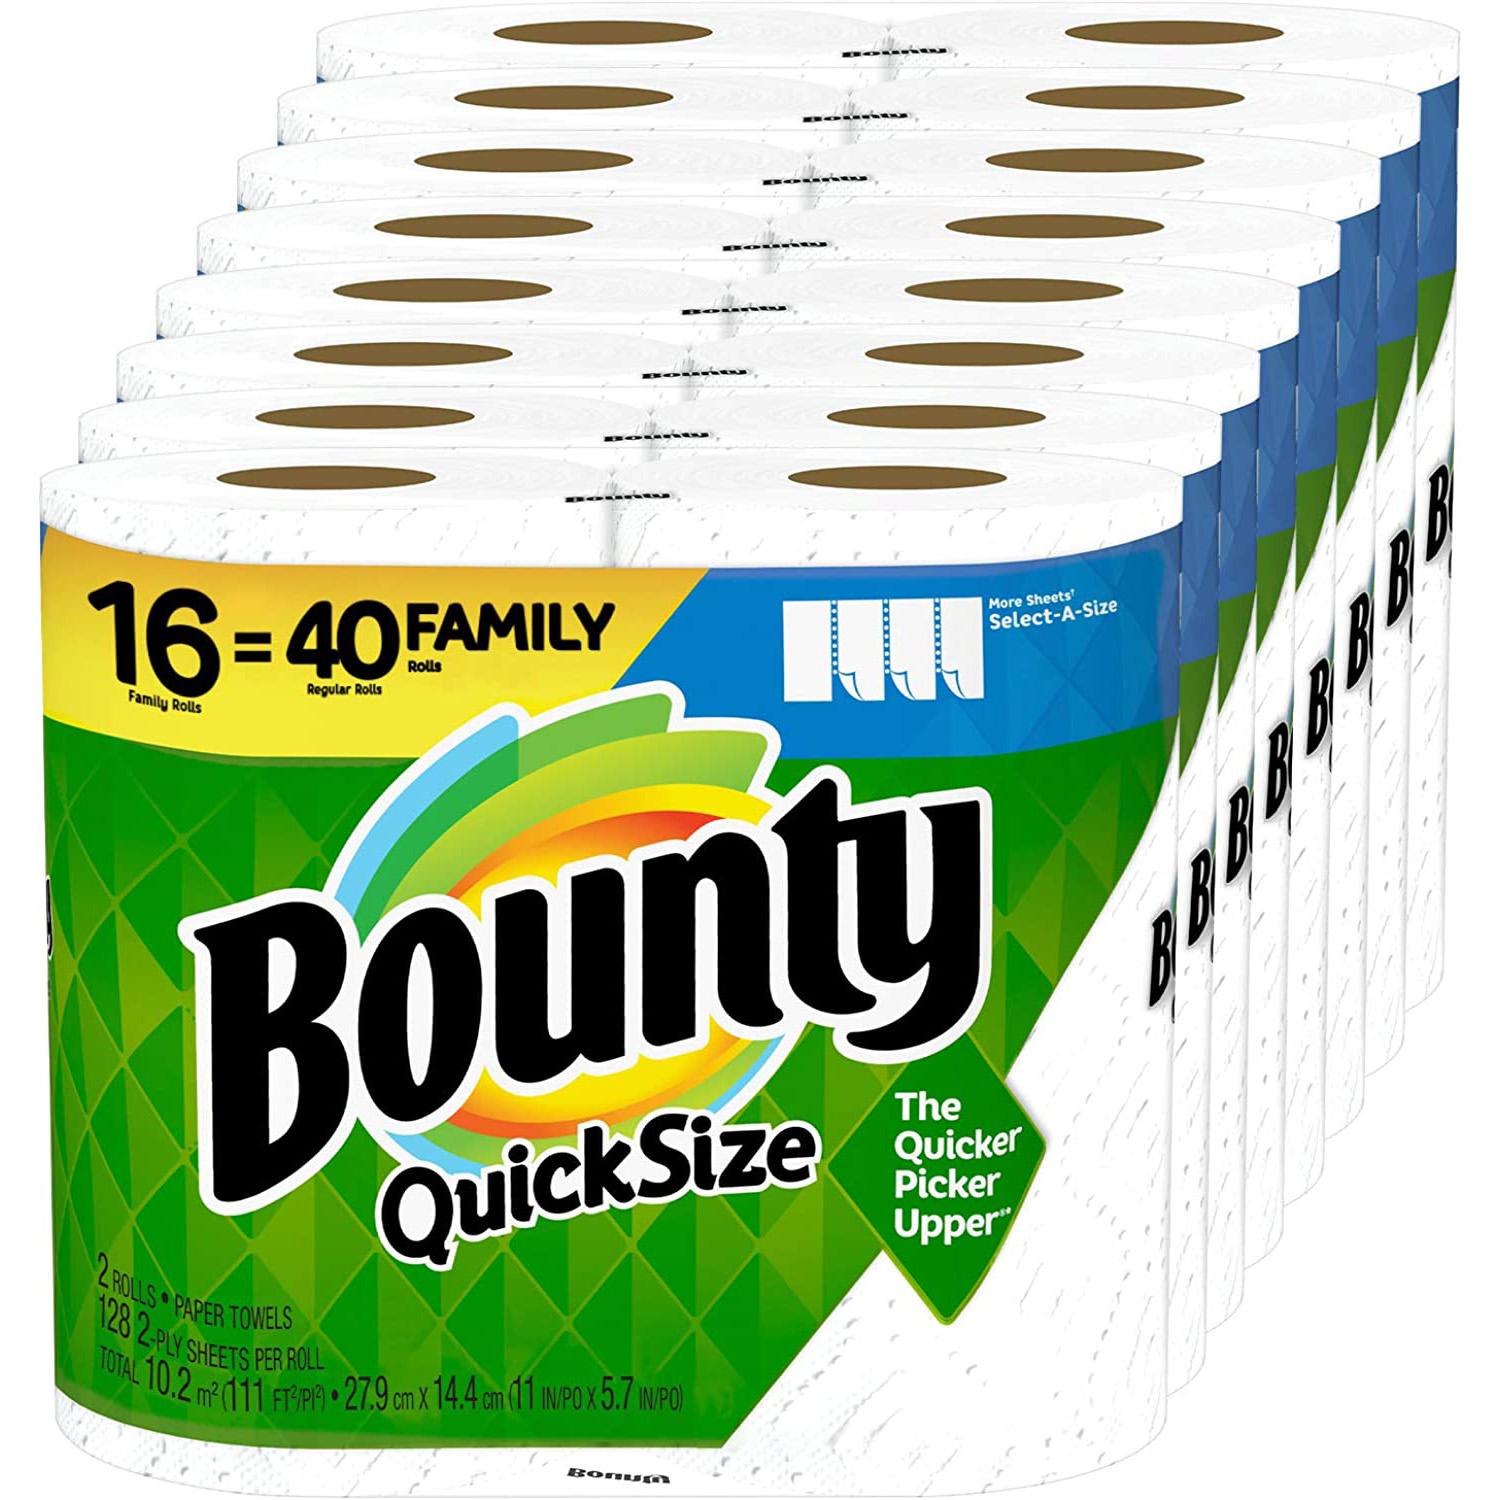 16 Bounty Quick-Size Paper Towels for $25.26 Shipped